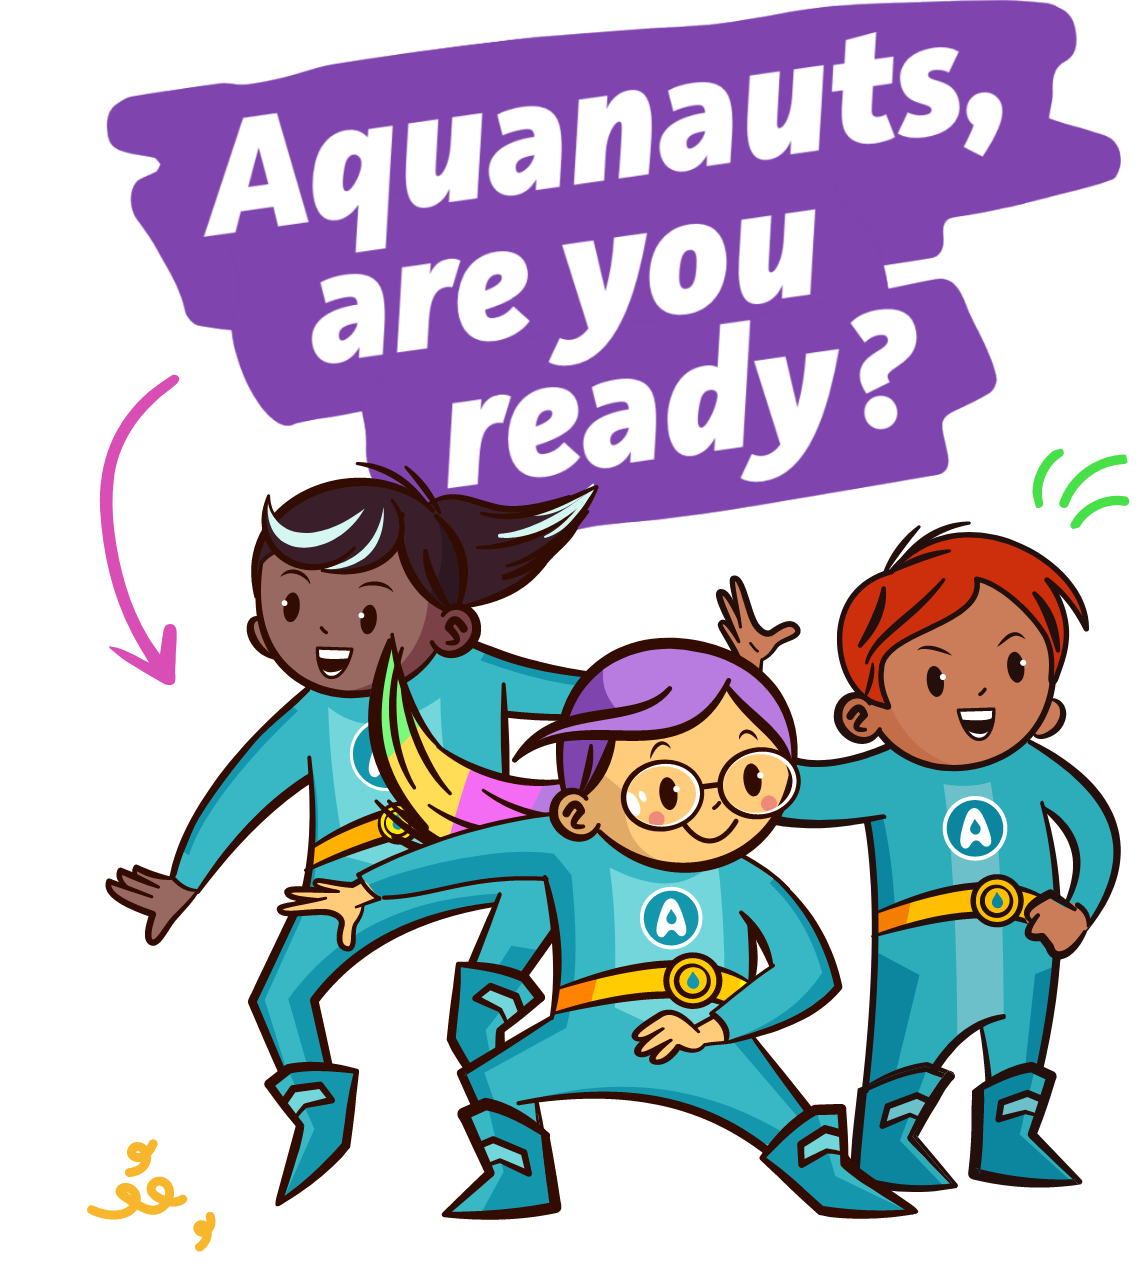 The Aquanauts in a group pose